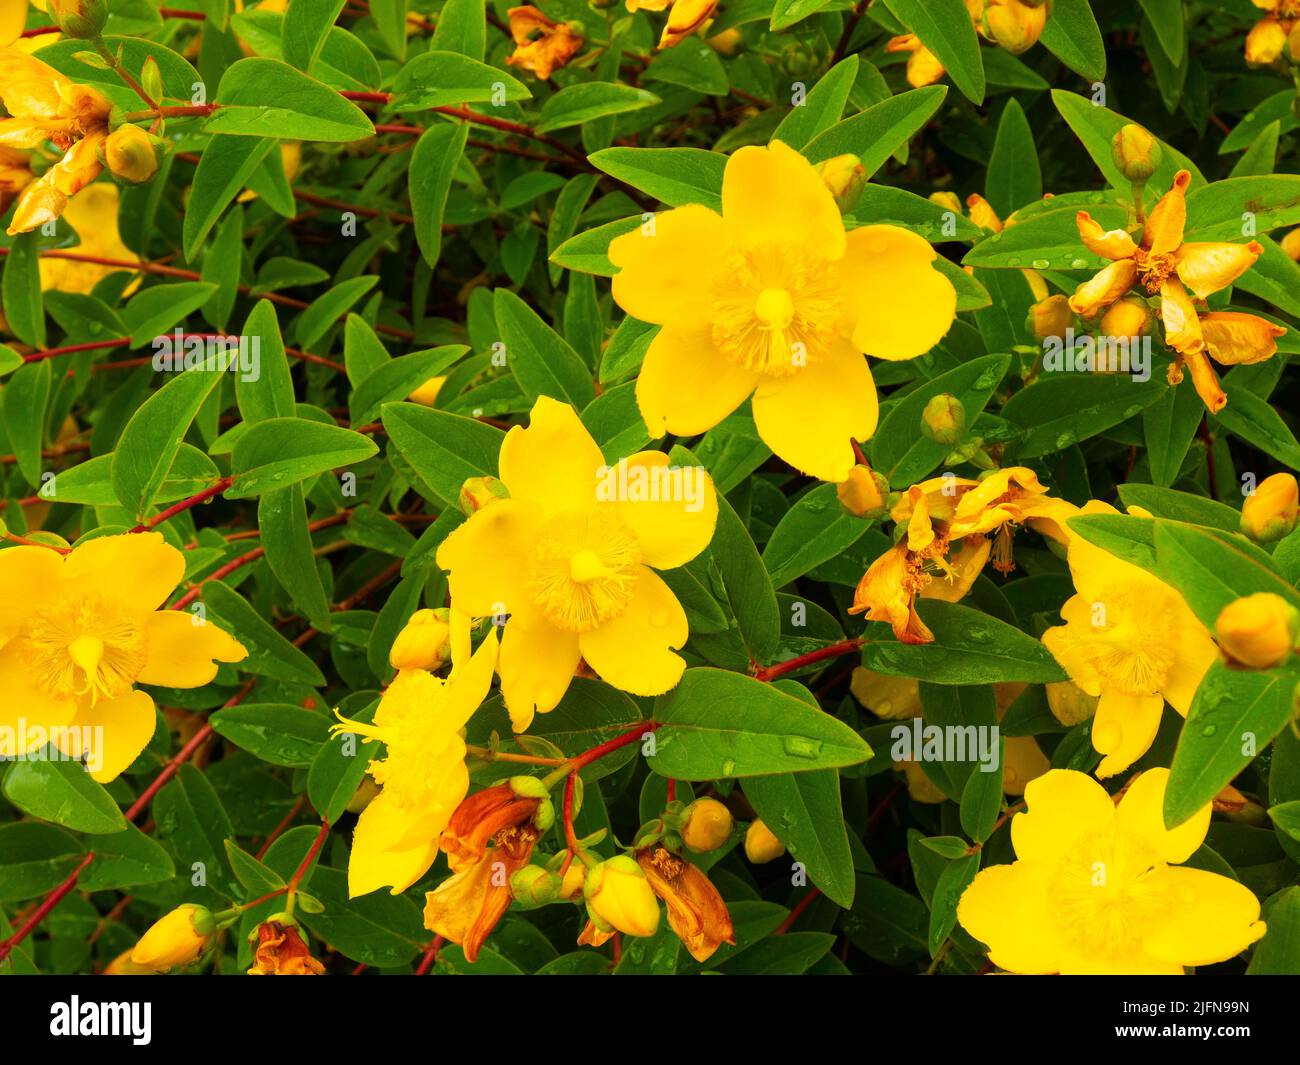 St John's wort Hyperium. perforatum is an upright perennial with small, ovate leaves and terminal clusters of star-shaped yellow flowers 1.5cm across Stock Photo